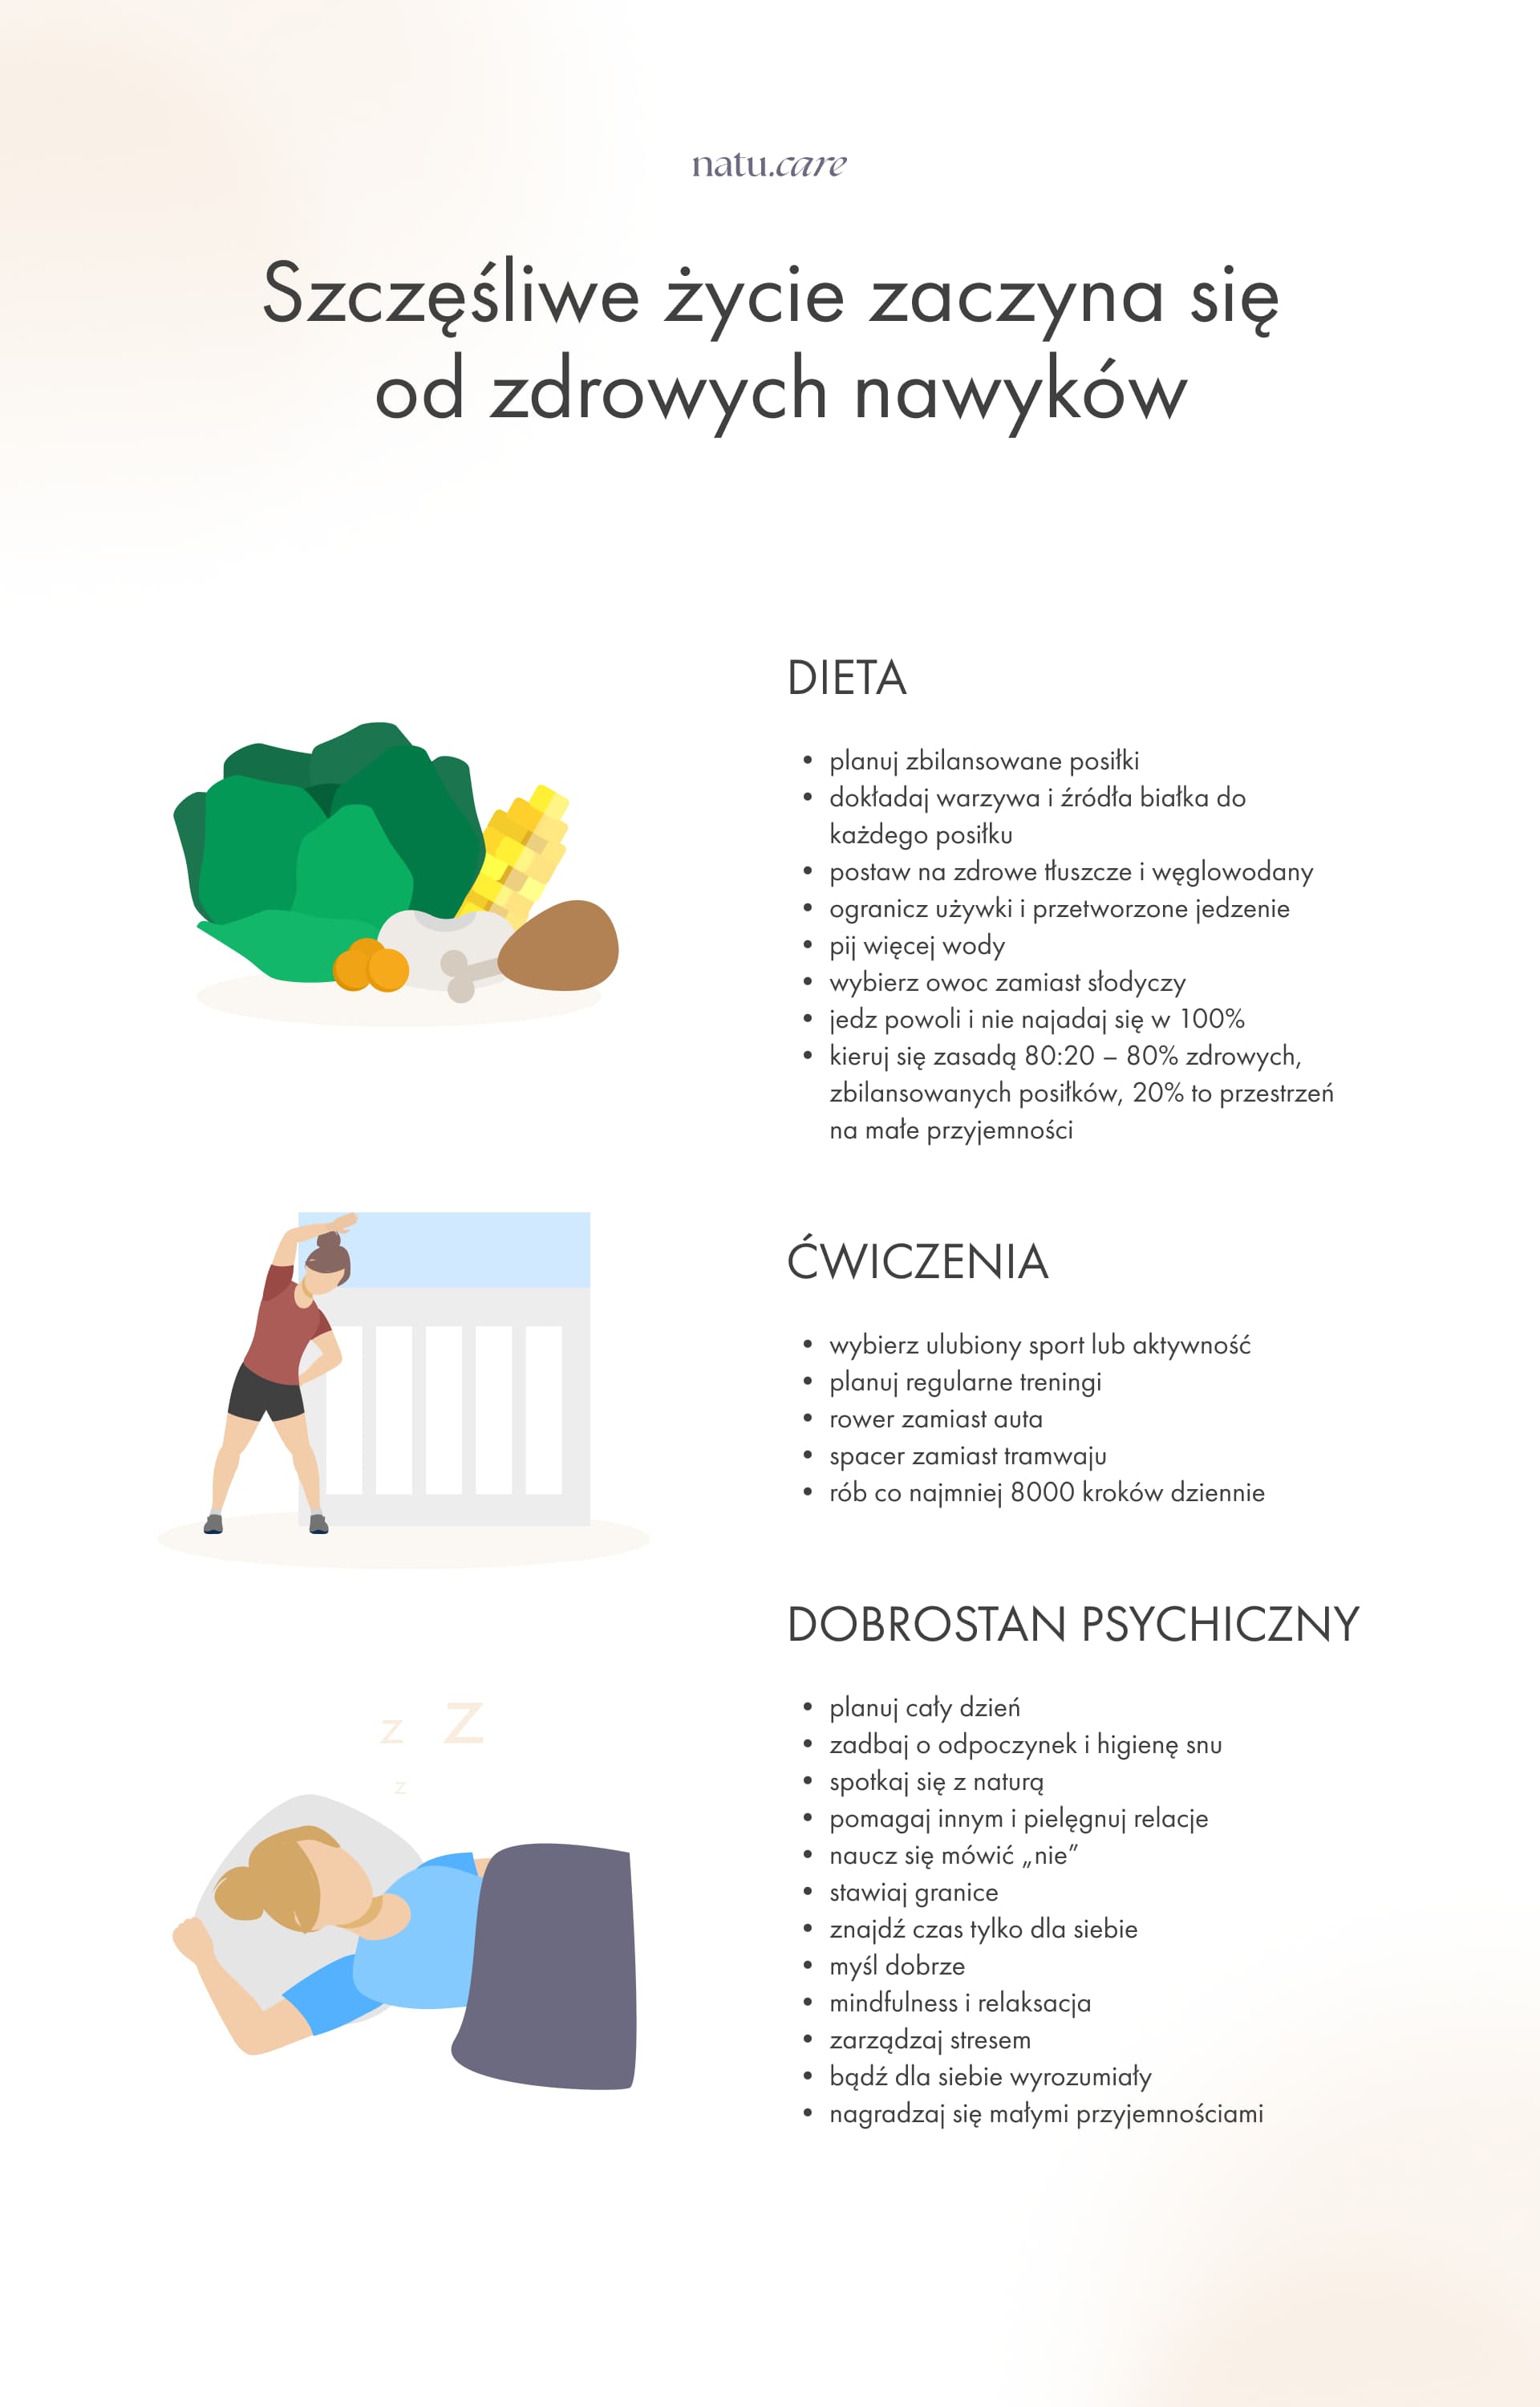 Infographic on healthy habits